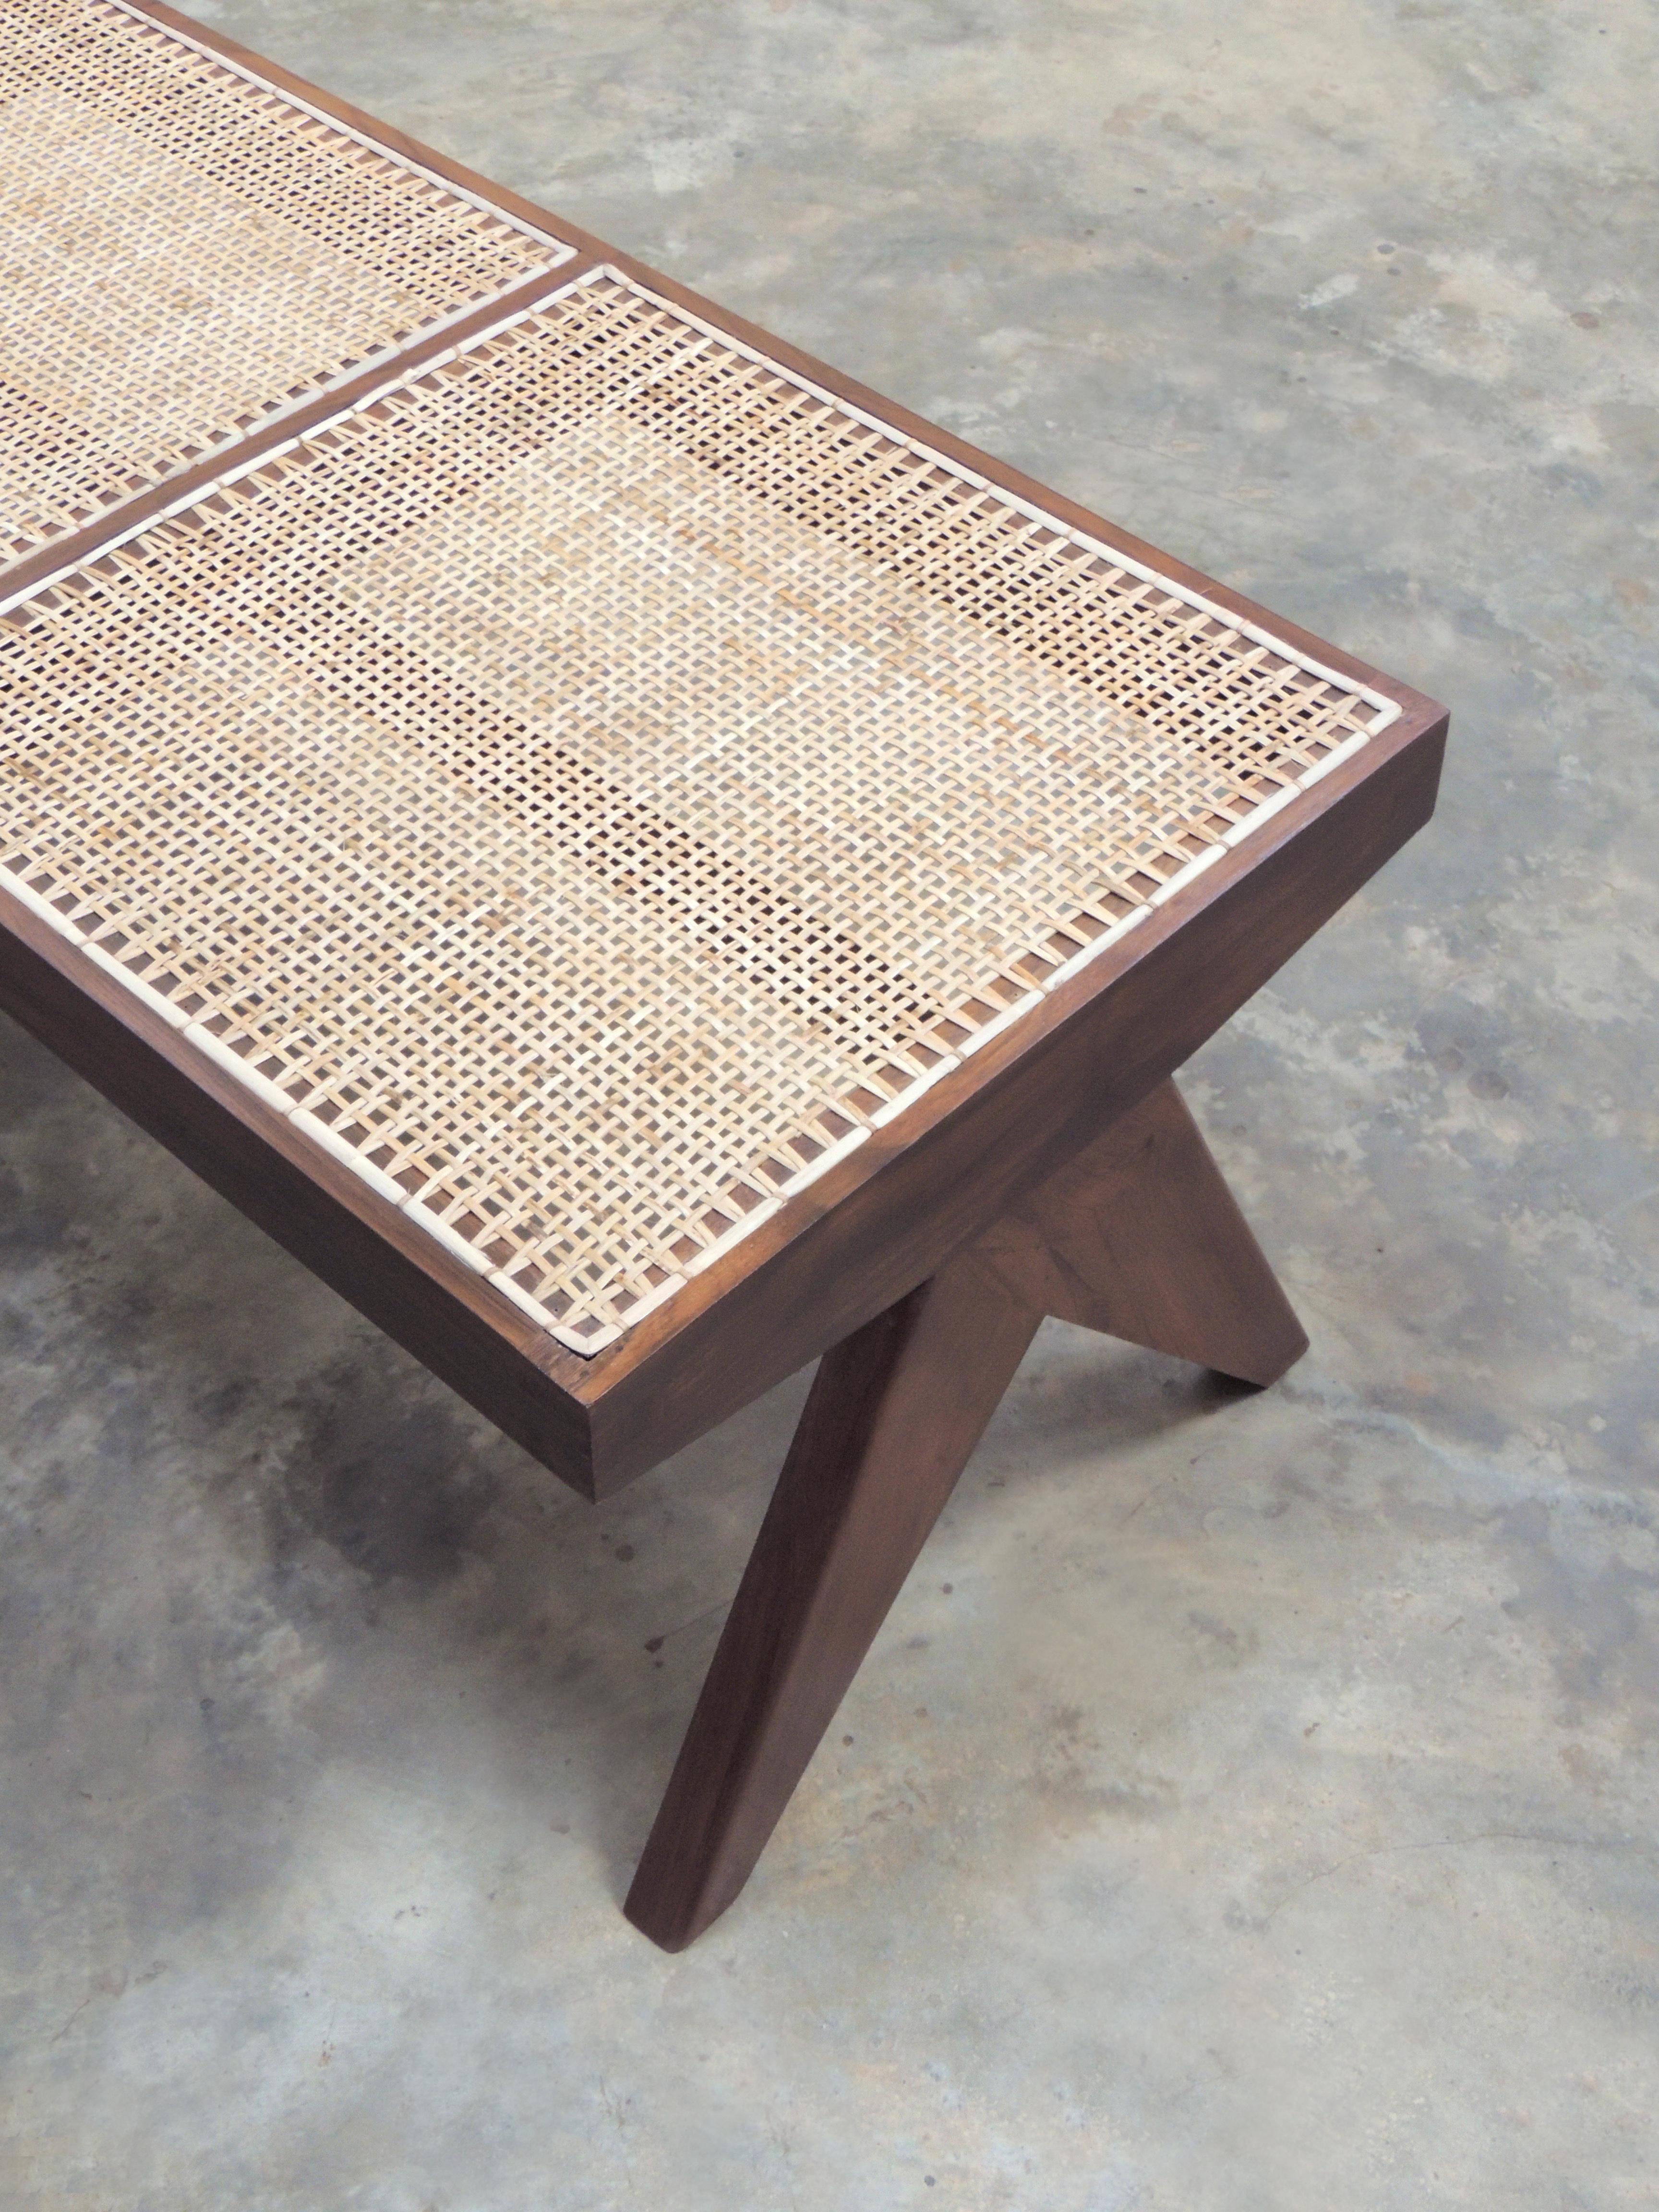 Asian Pierre Jeanneret's Bench, Hand-Sculpted Contemporary Re-Edition